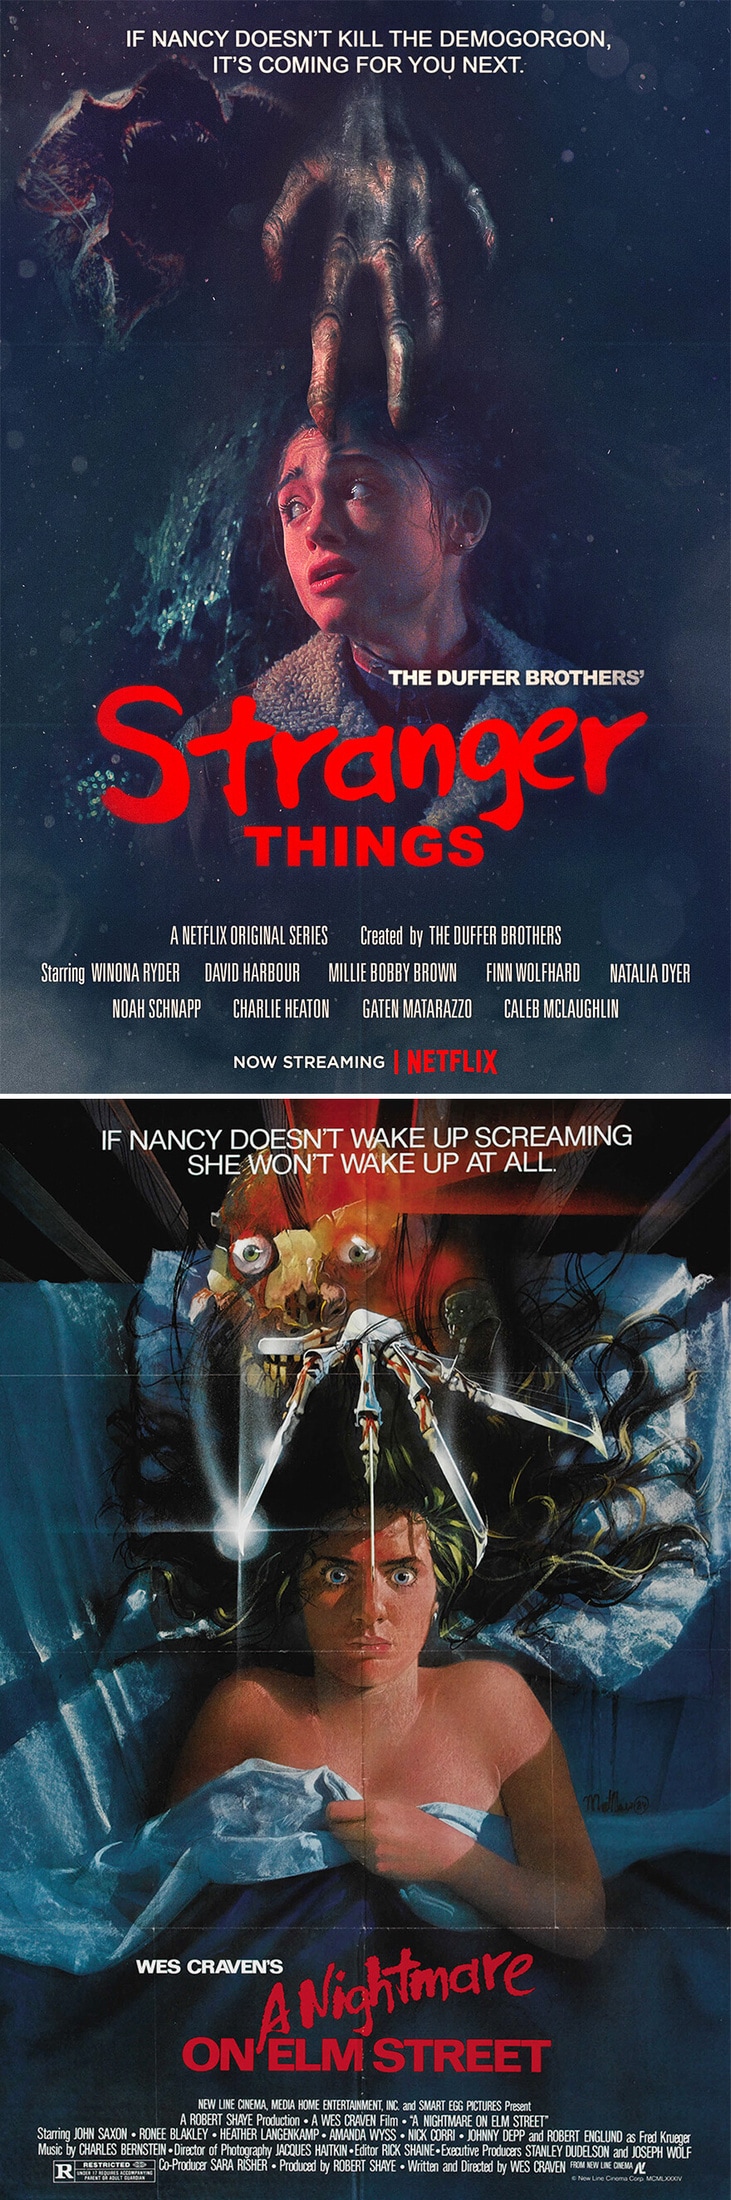 Netflix Recreated “stranger Things” Along With The 70s And